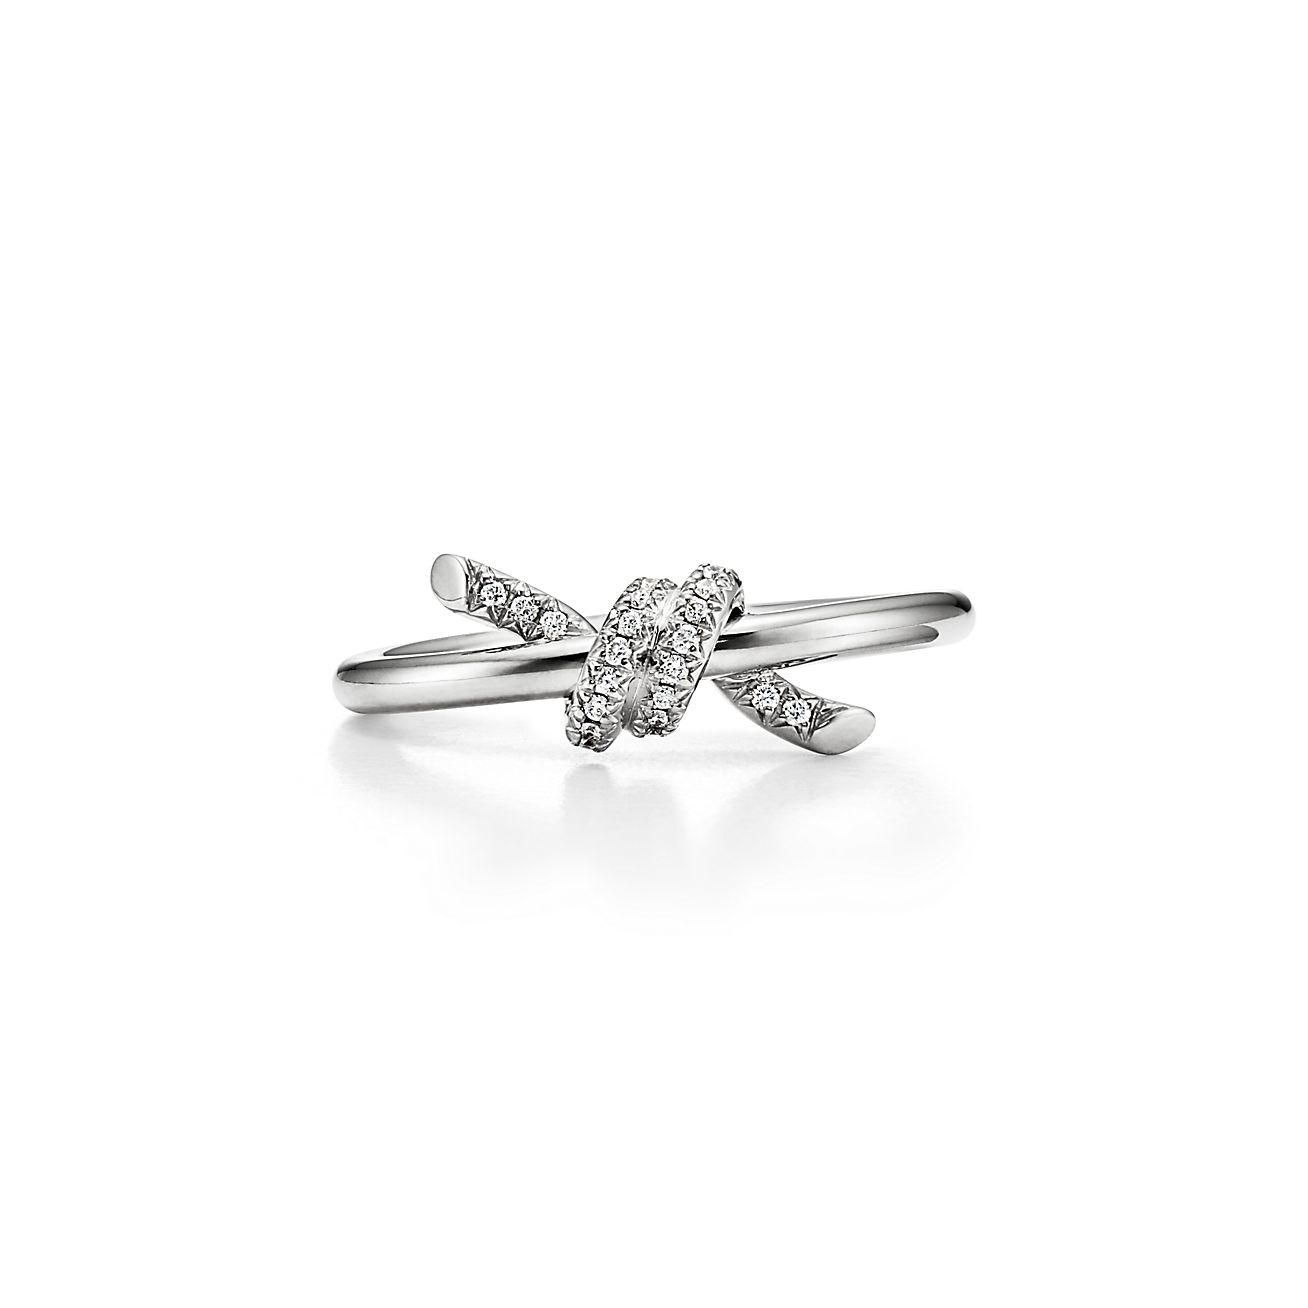 Tiffany Knot Ring in White Gold with Diamonds | Tiffany & Co.